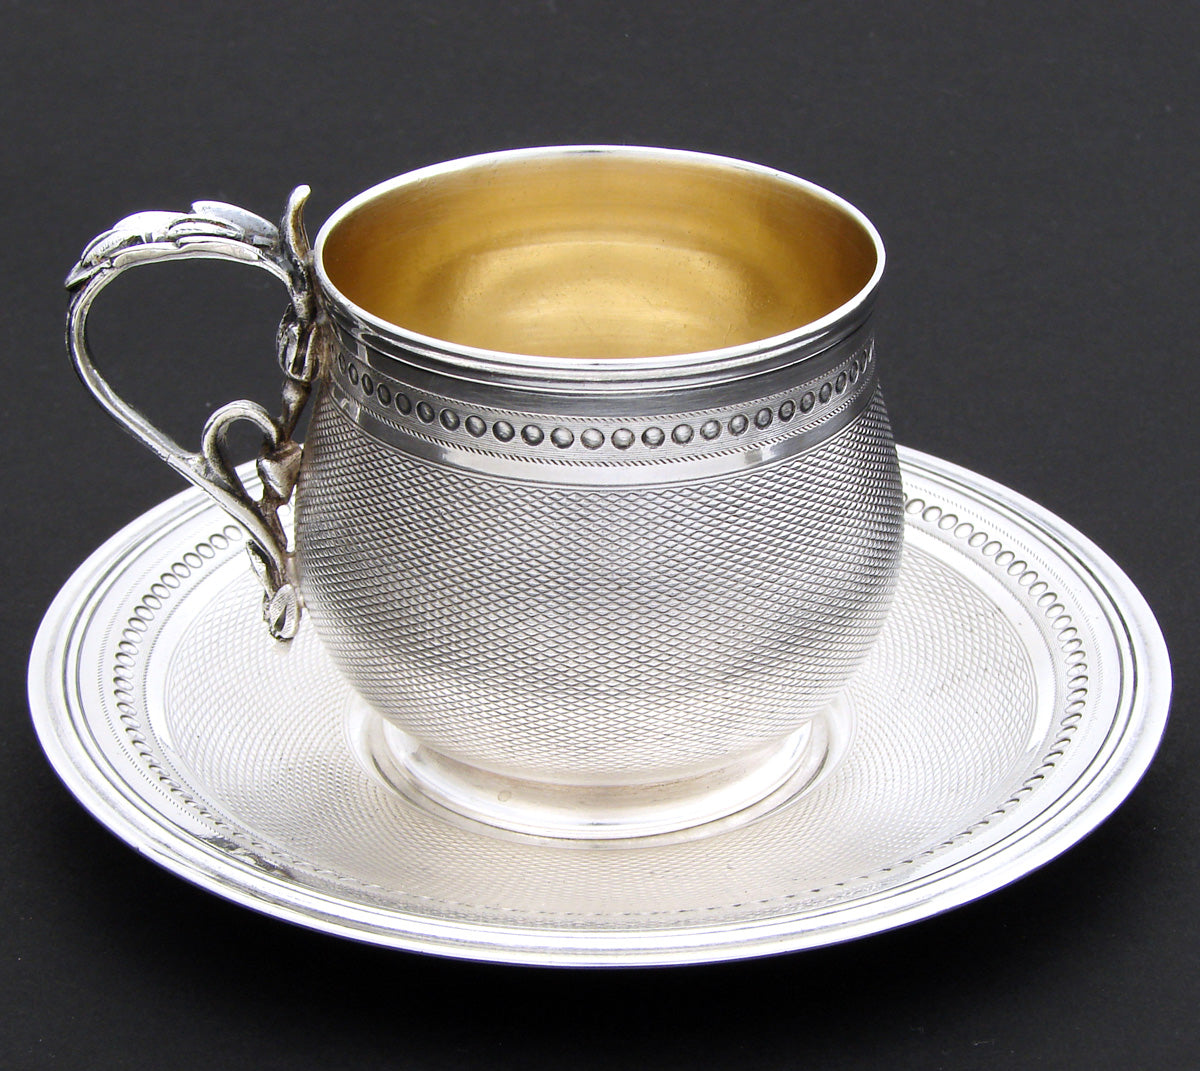 Lovely Antique French Silver Plate Coffee or Tea Cup & Saucer, Ornate Guilloche Style